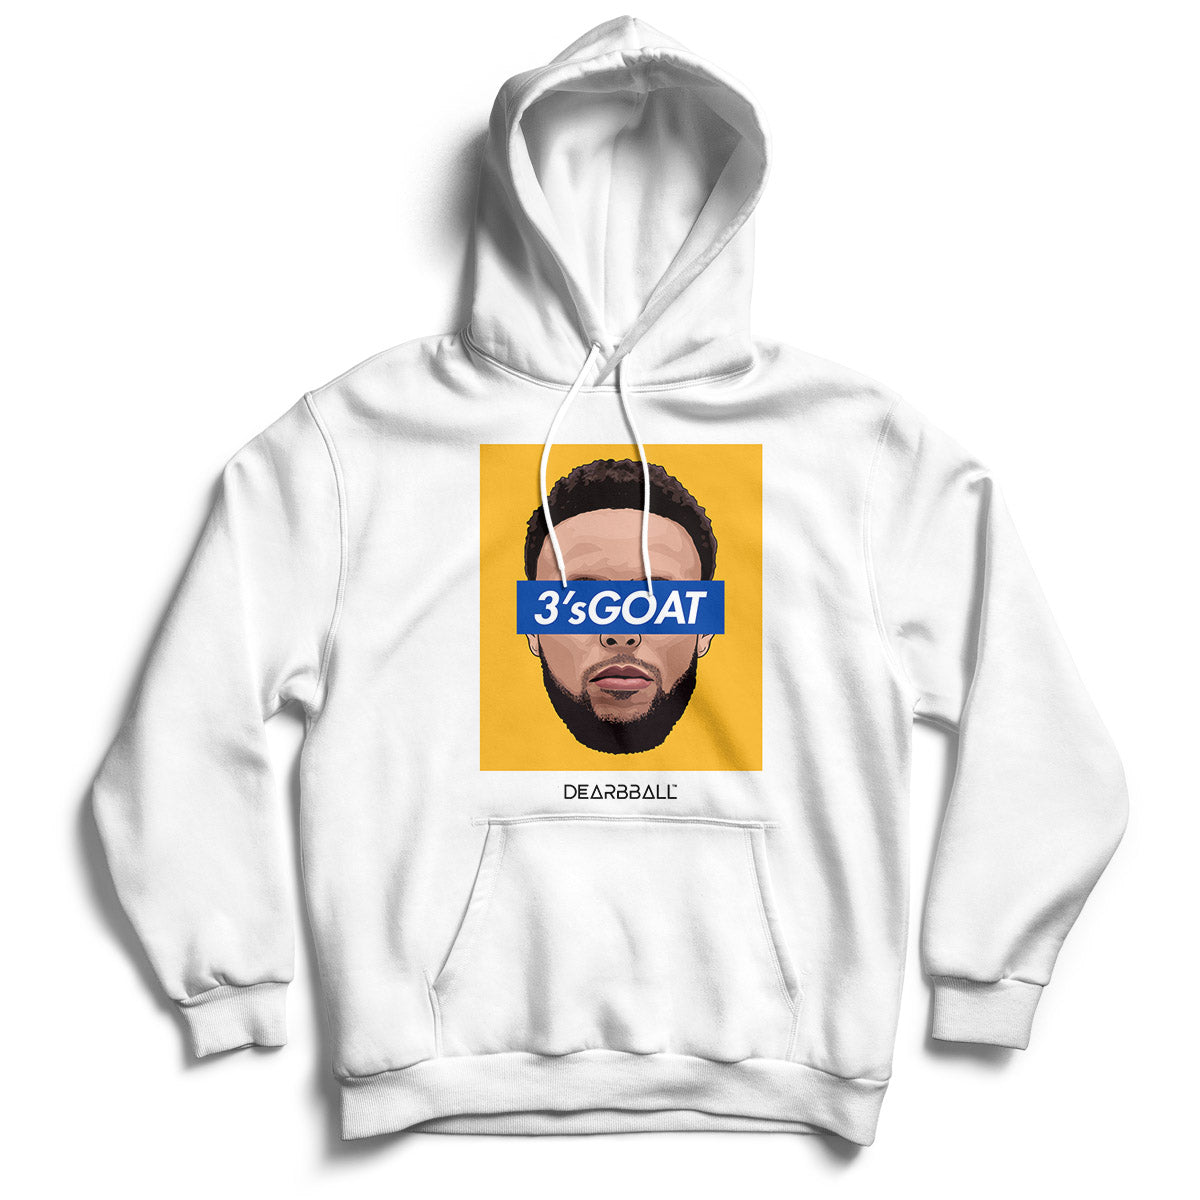 DEARBBALL HOODIE STEPHEN CURRY - 3`sGOAT SUPREMACY